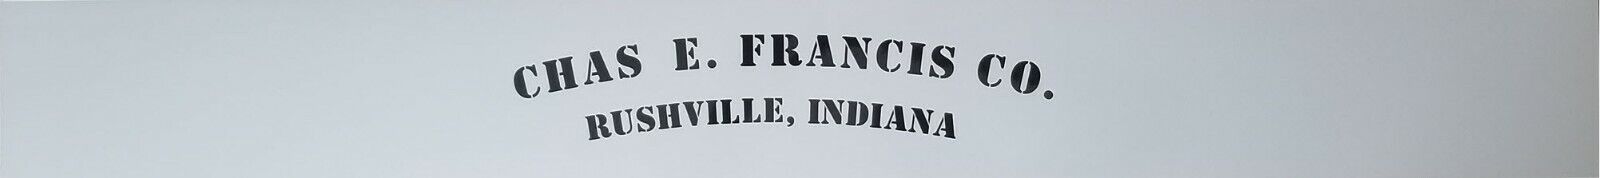 CHAS E. FRANCIS CO. RUSHVILLE, INDIANA Factory Cart Lettering Kit